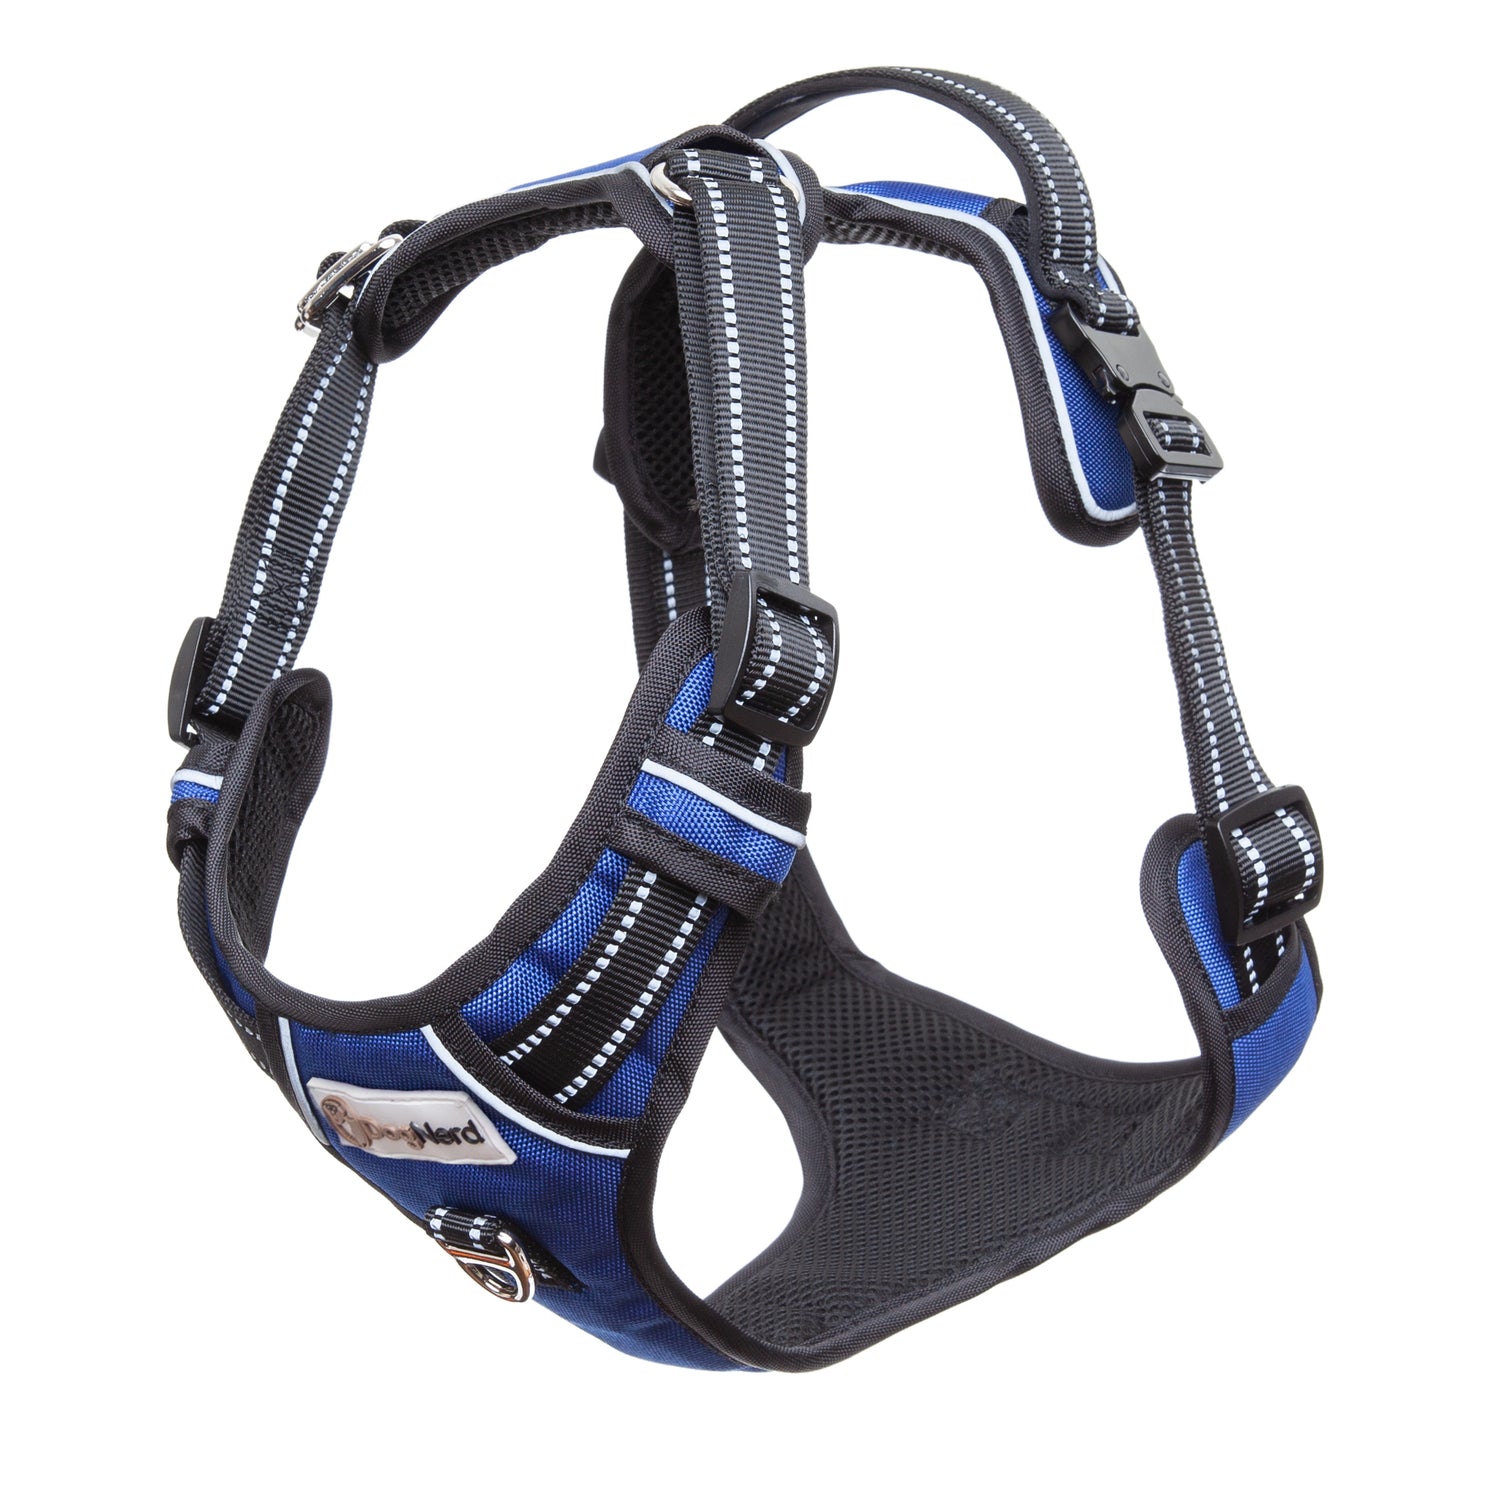 Harnesses Designed By A Nerd, For Your Dog